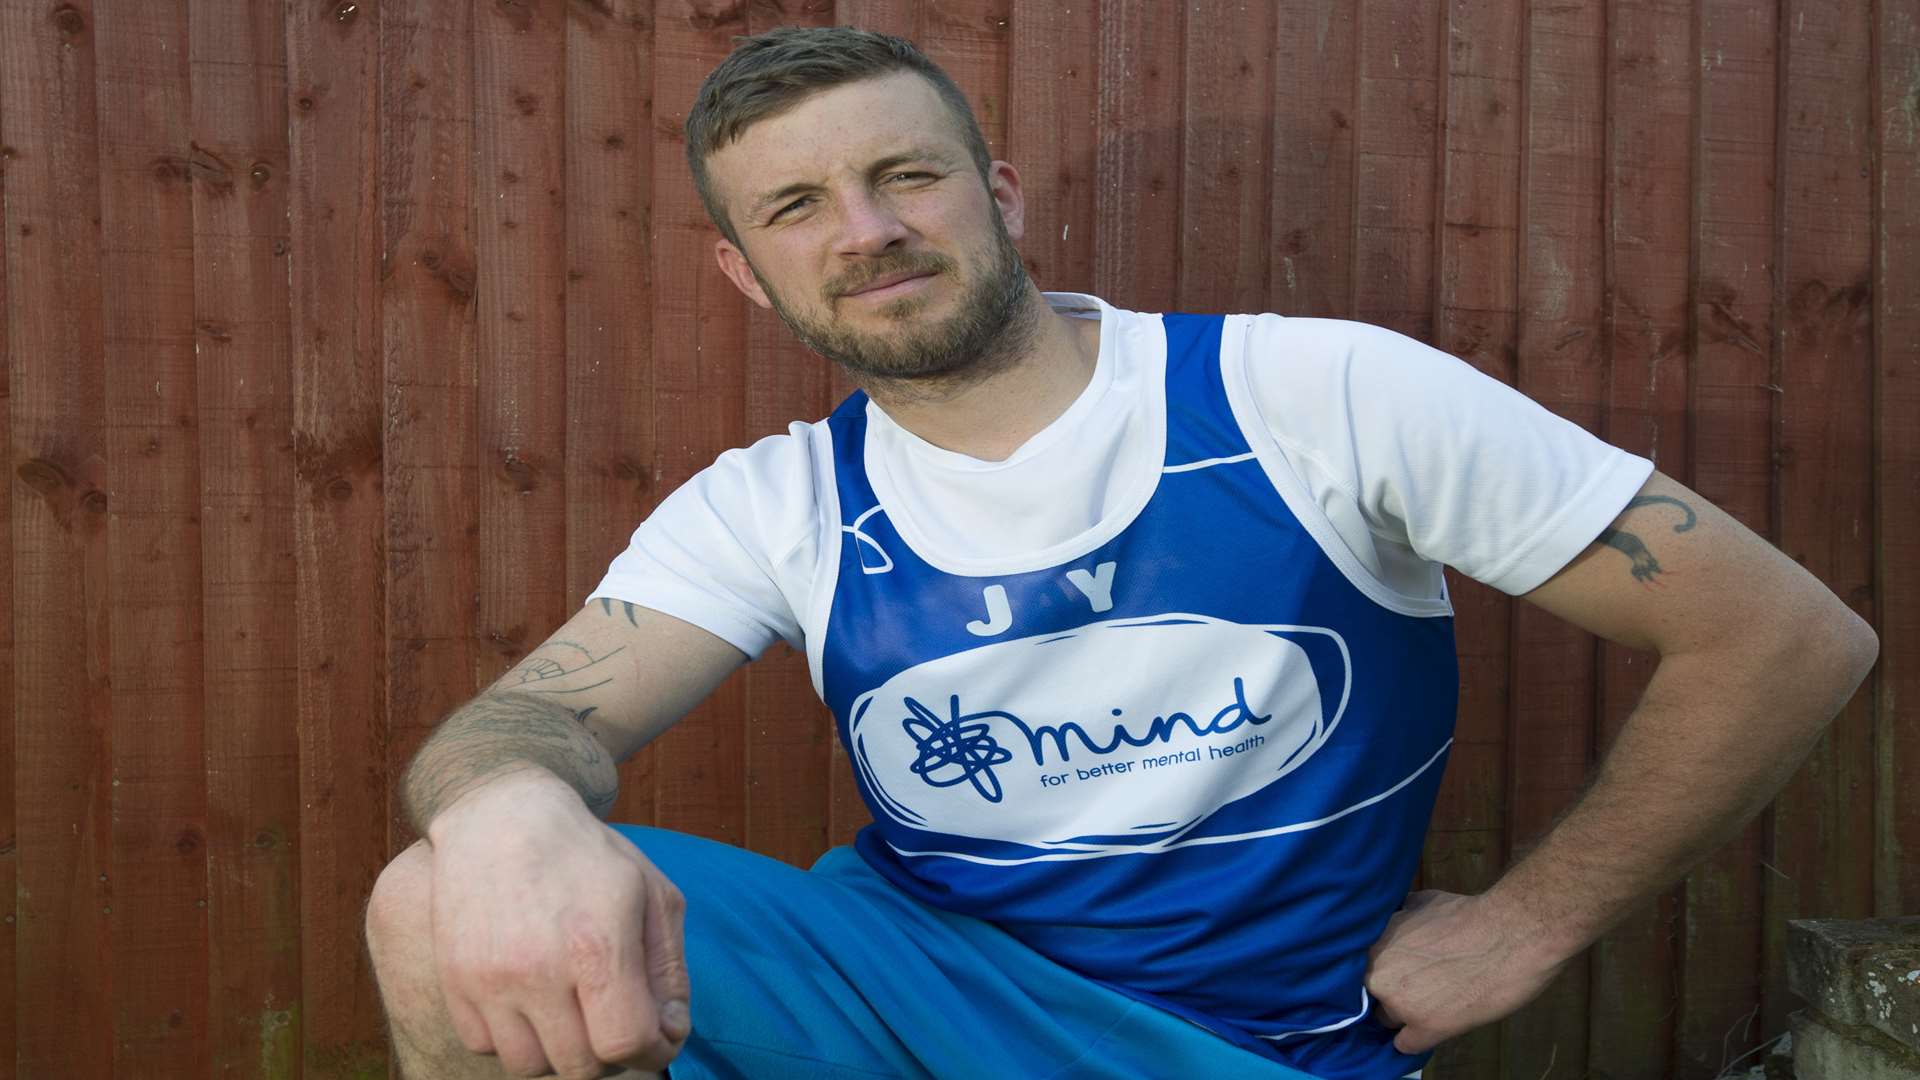 Jamie Davies, of Collis Street, Strood, had mental health issues and is running a 10k race in May for charity Mind